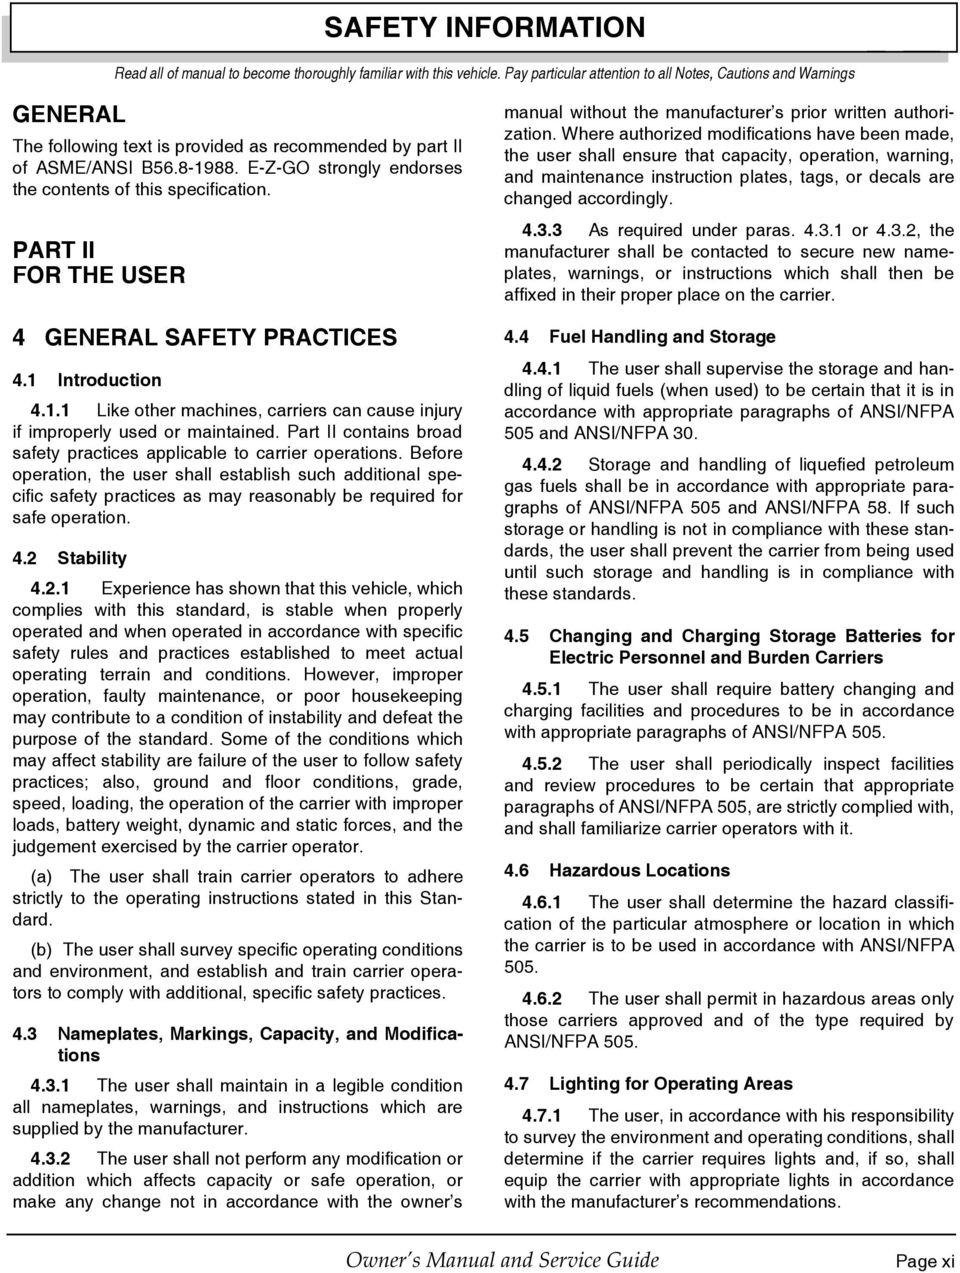 E-Z-GO strongly endorses the contents of this specification. PART II FOR THE USER 4 GENERAL SAFETY PRACTICES 4.1 Introduction 4.1.1 Like other machines, carriers can cause injury if improperly used or maintained.